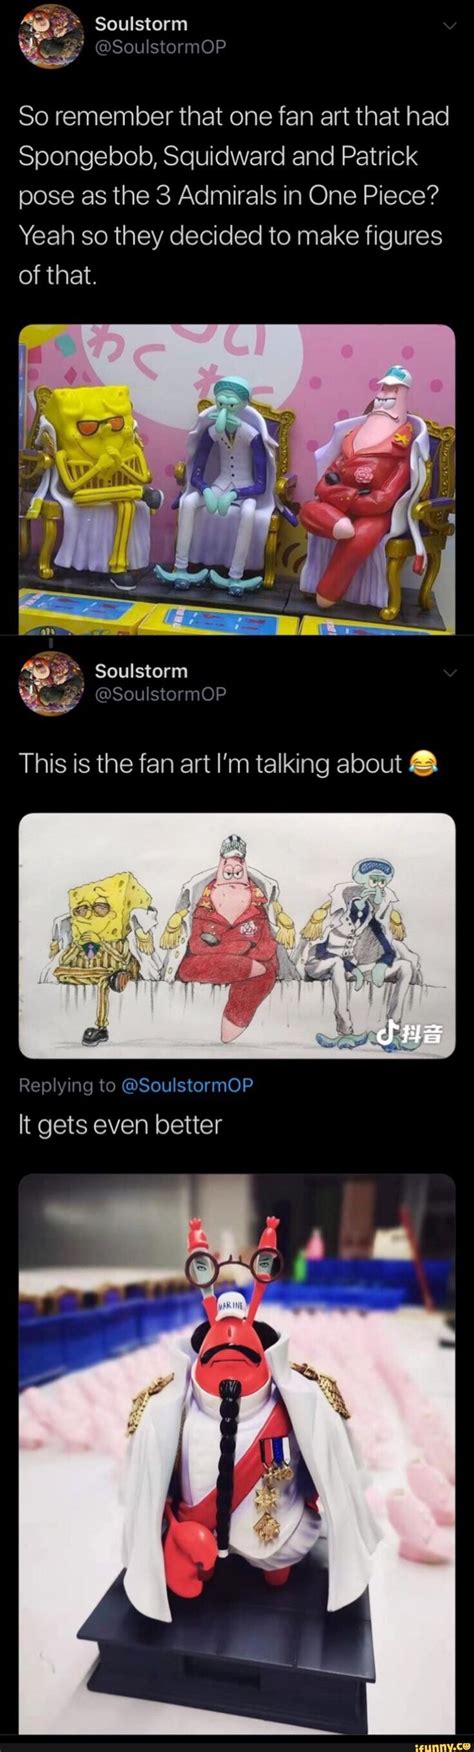 So Remember That One Fan Art That Had Spongebob Squidward And Patrick